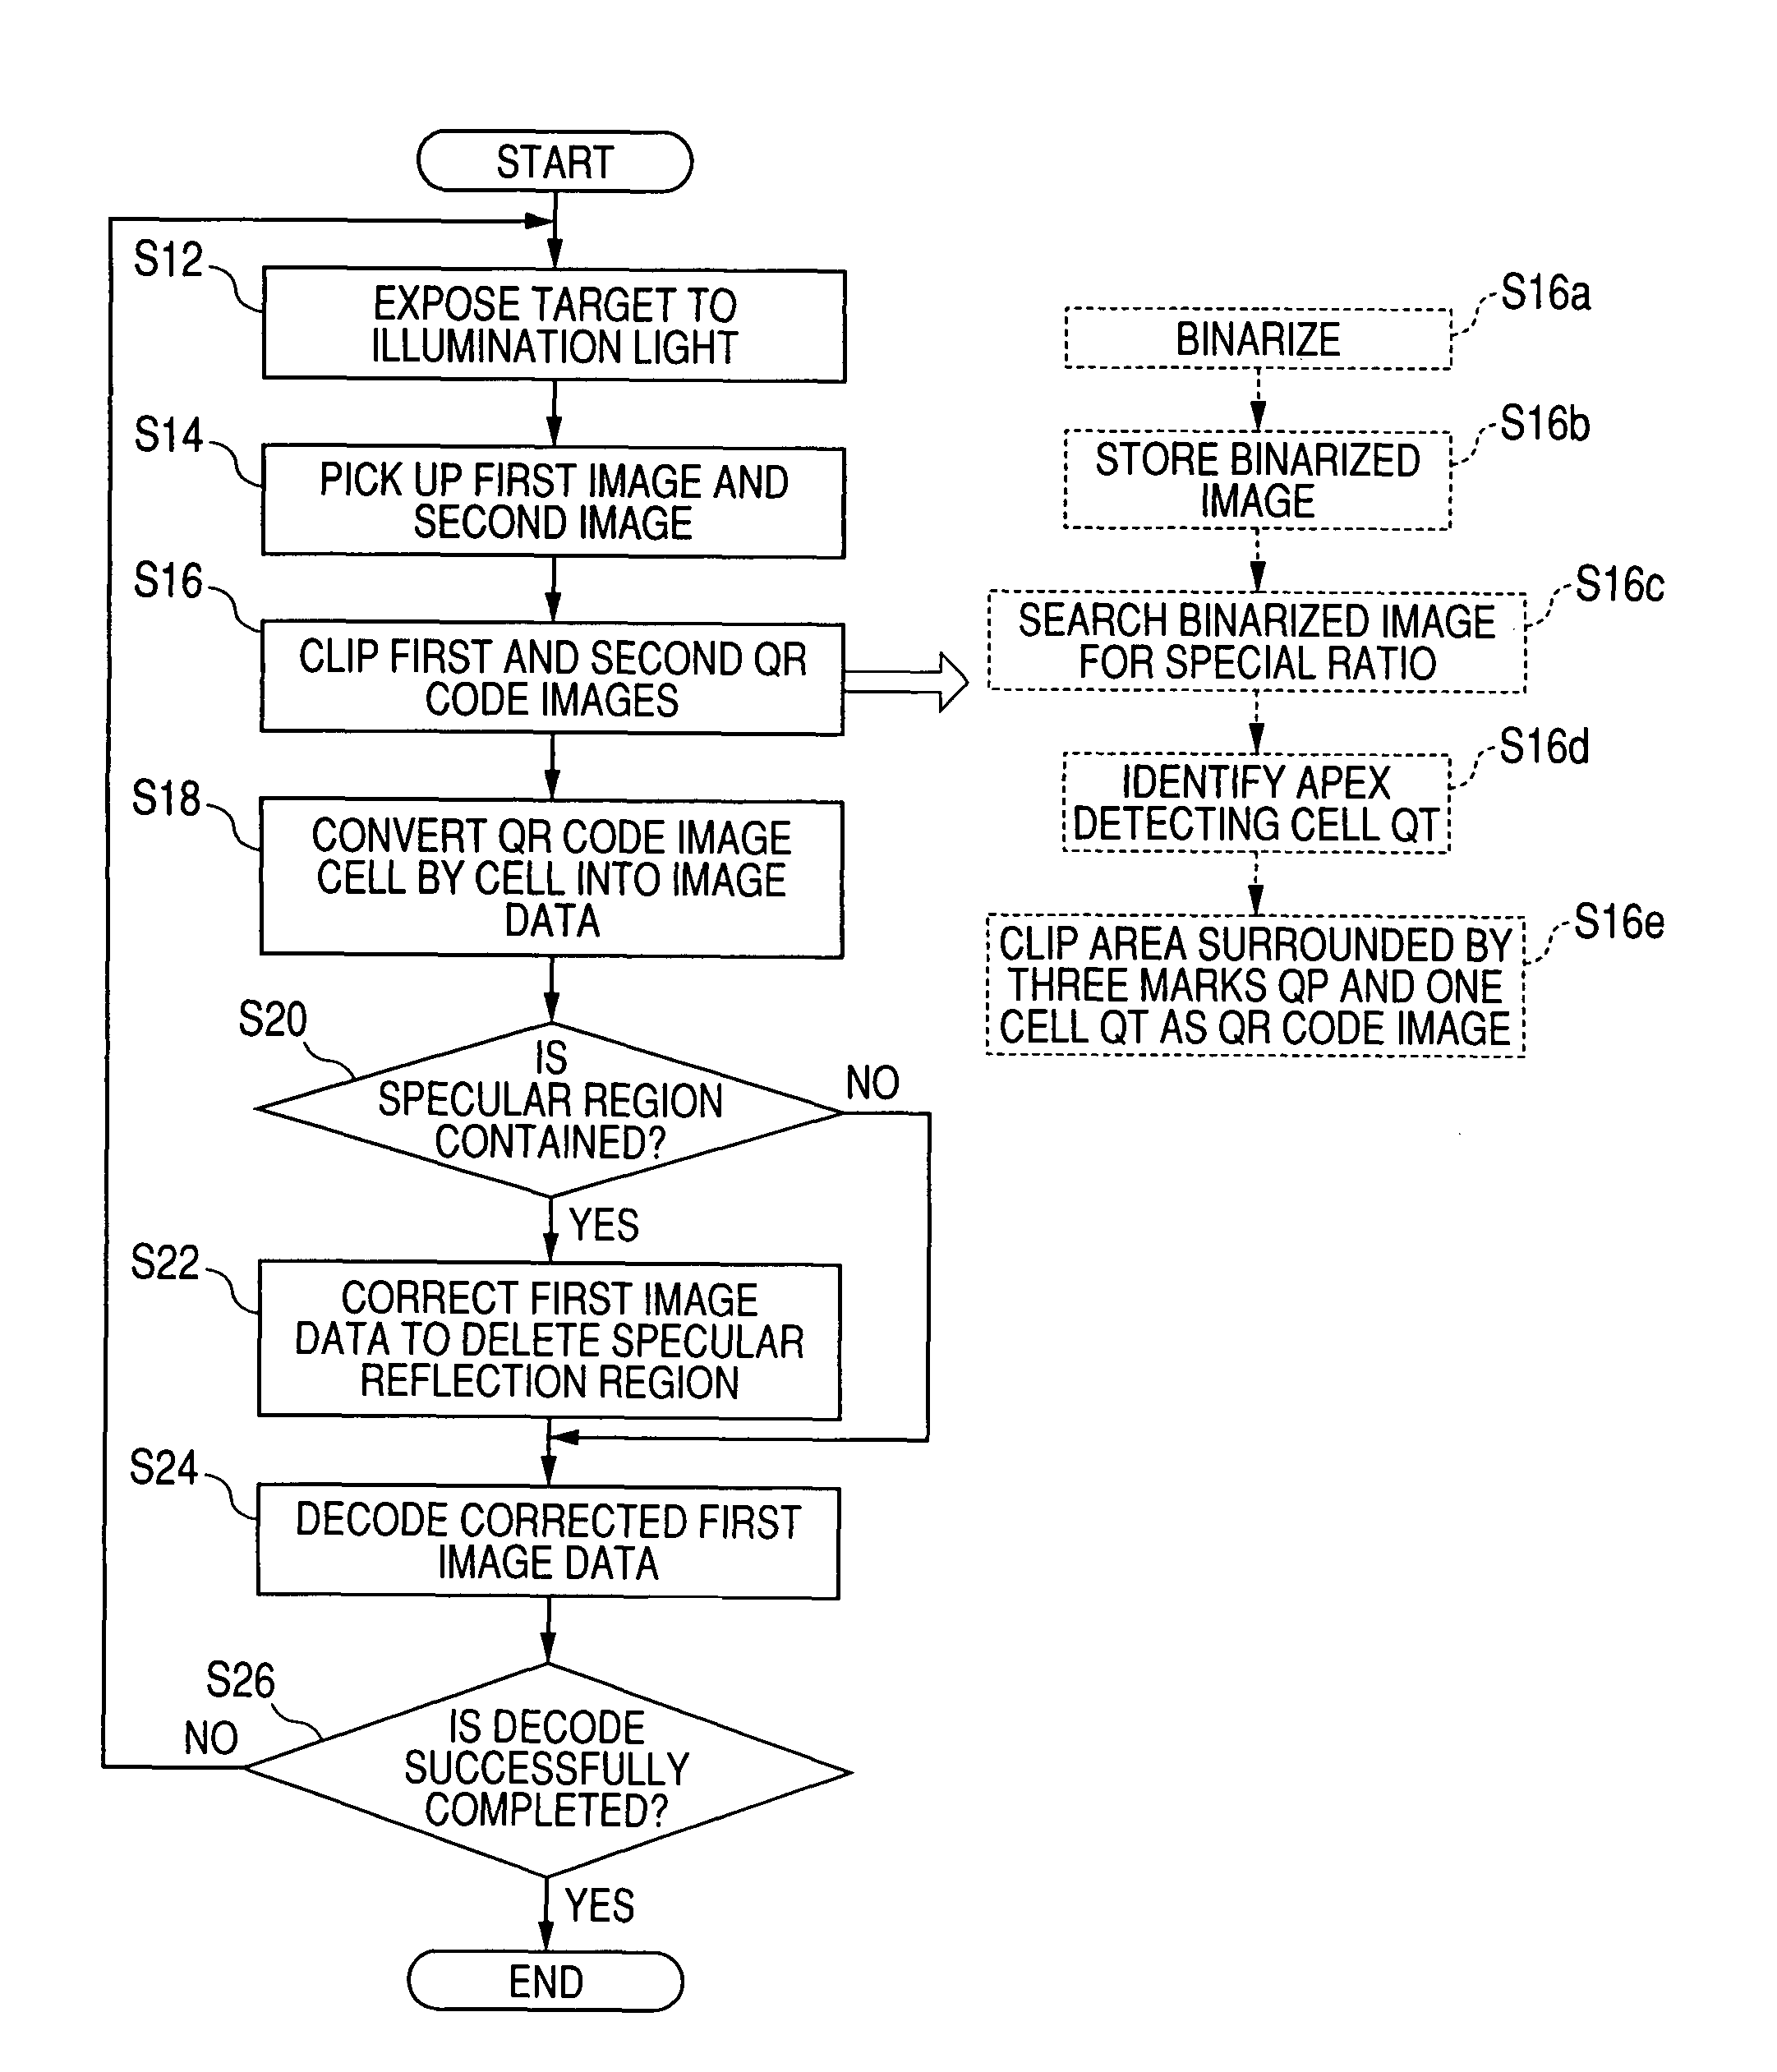 Apparatus for optically reading information stored in graphic symbol